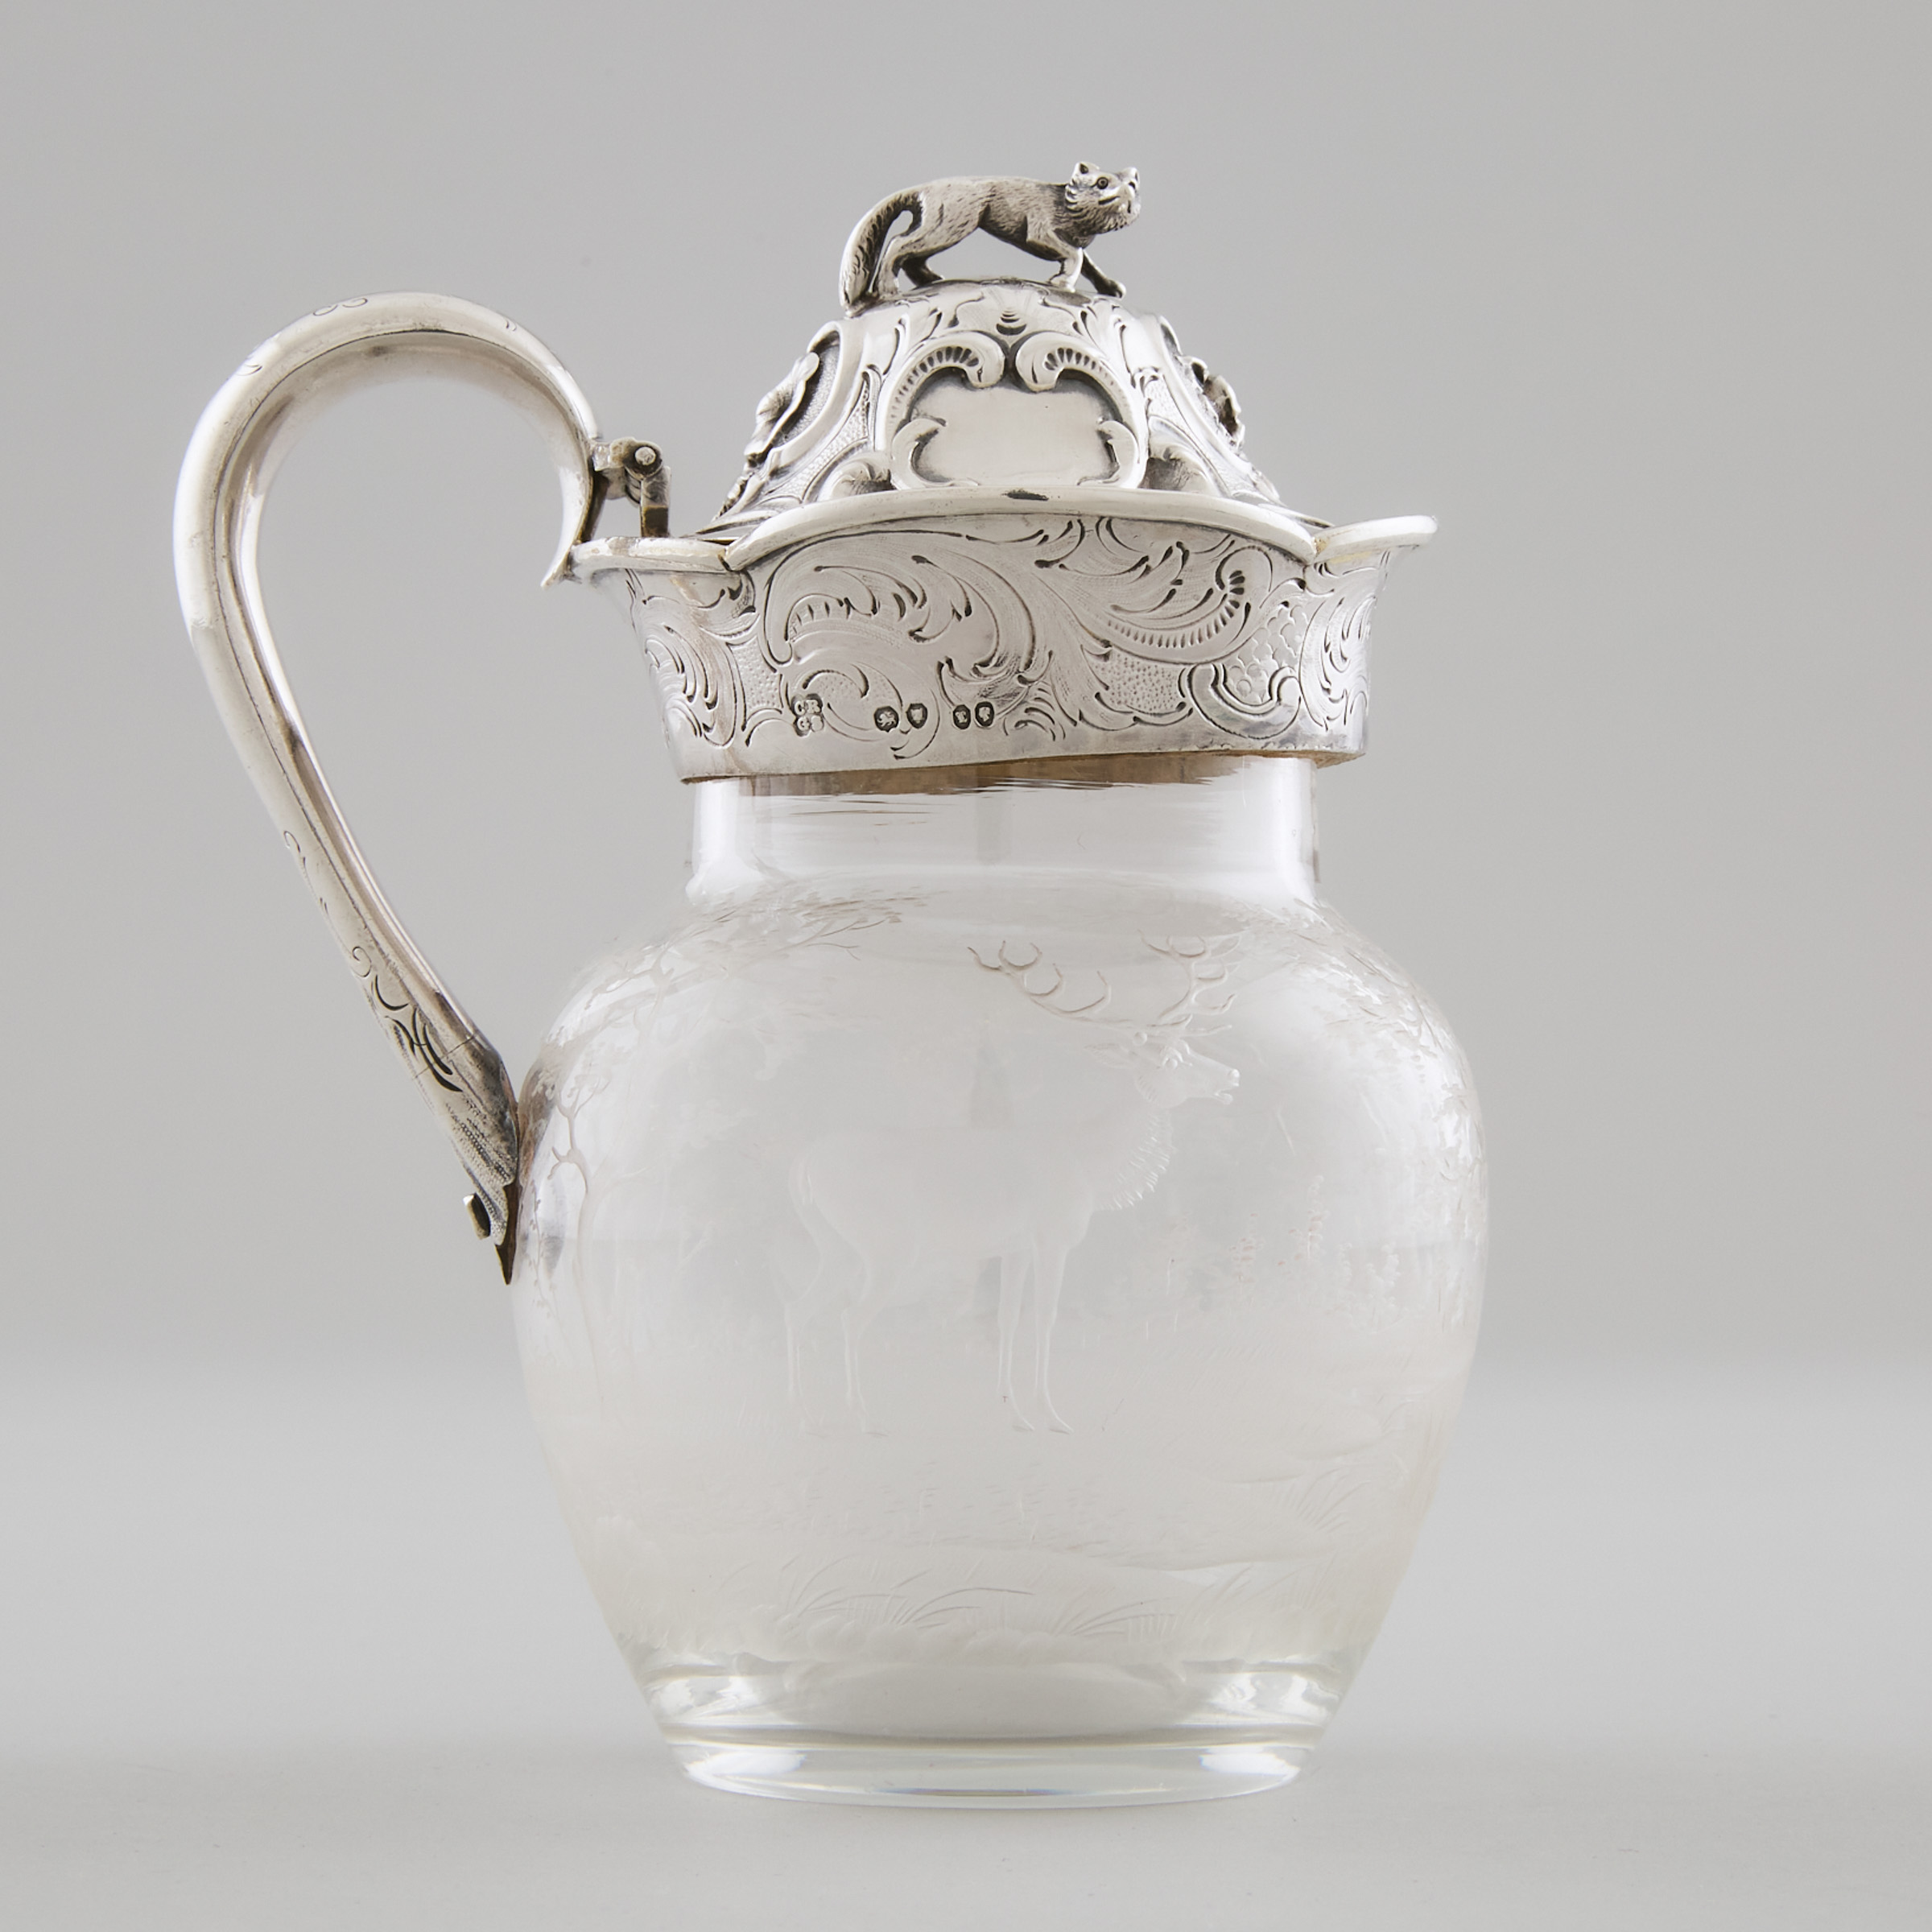 Victorian Silver Mounted Etched Glass Syrup Jug, Charles Reily & George Storer, London, 1846